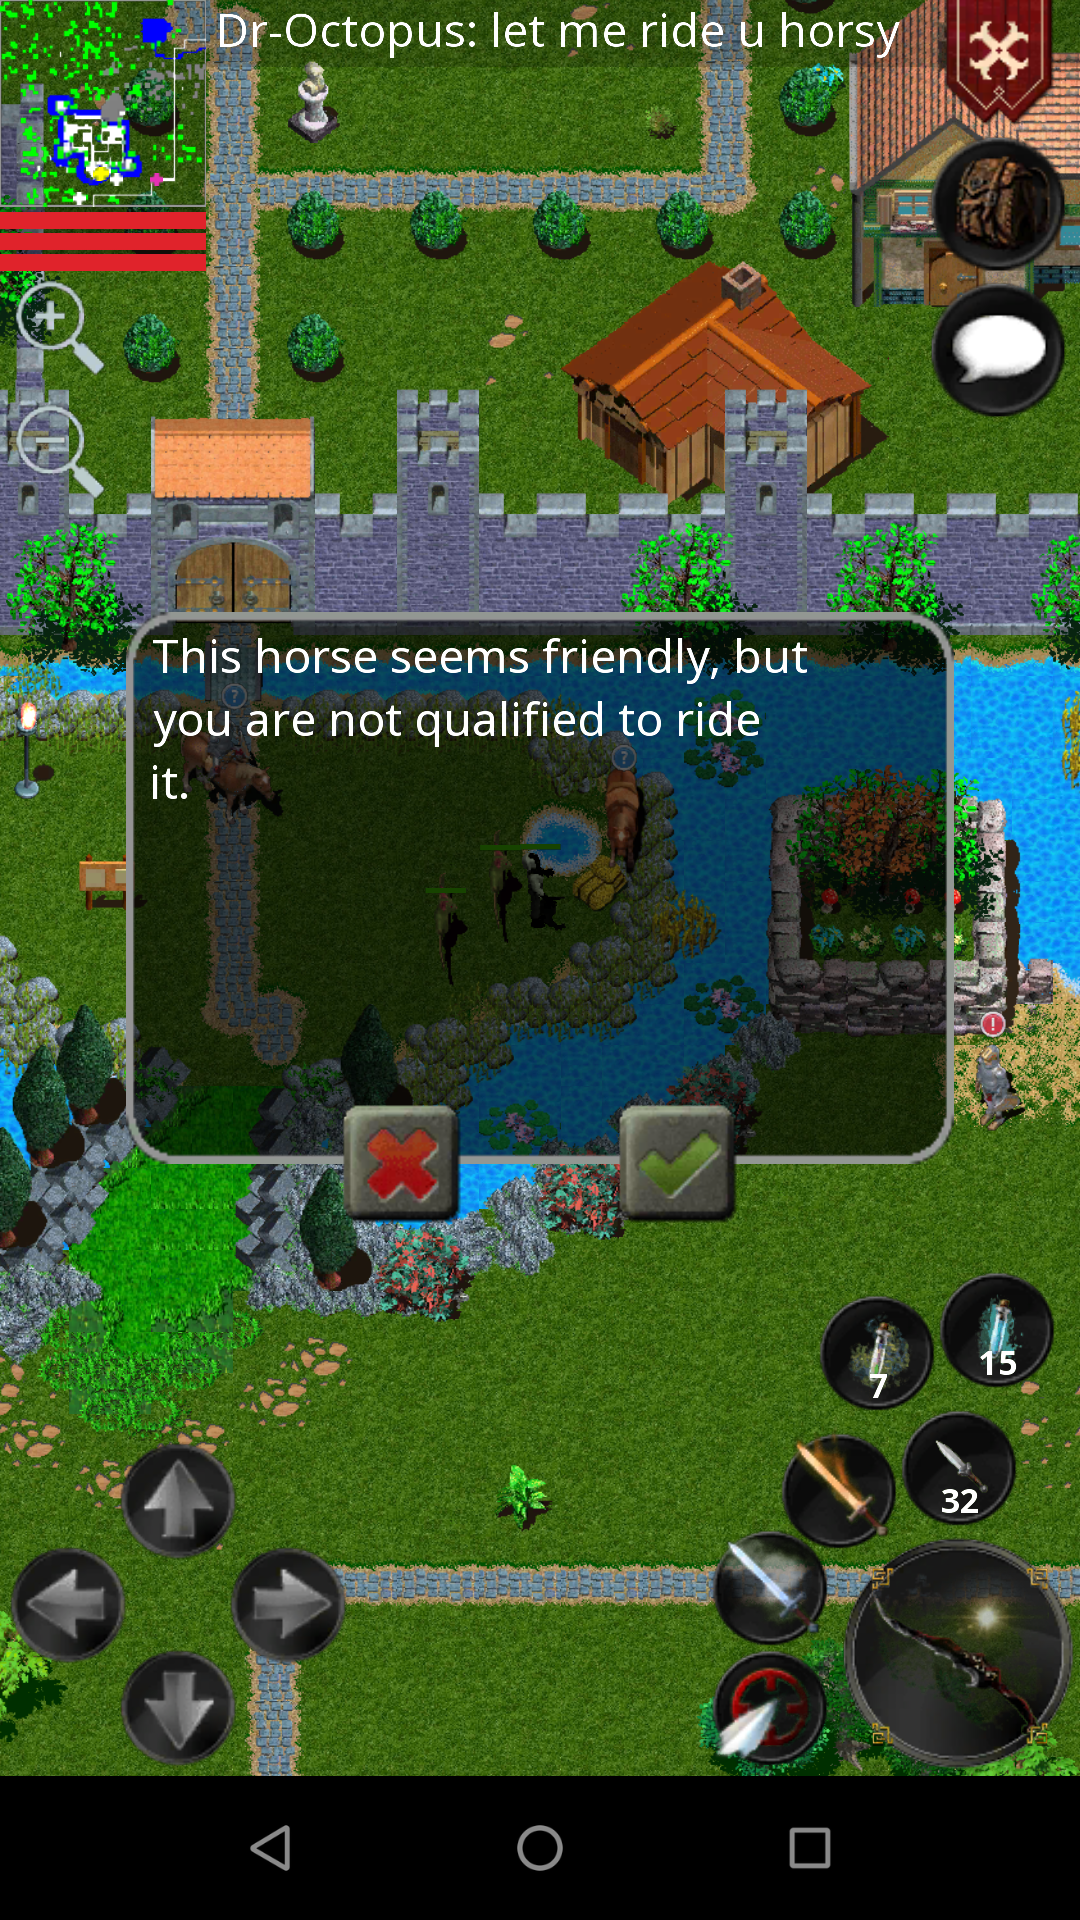 Friendly Horse but With no saddle